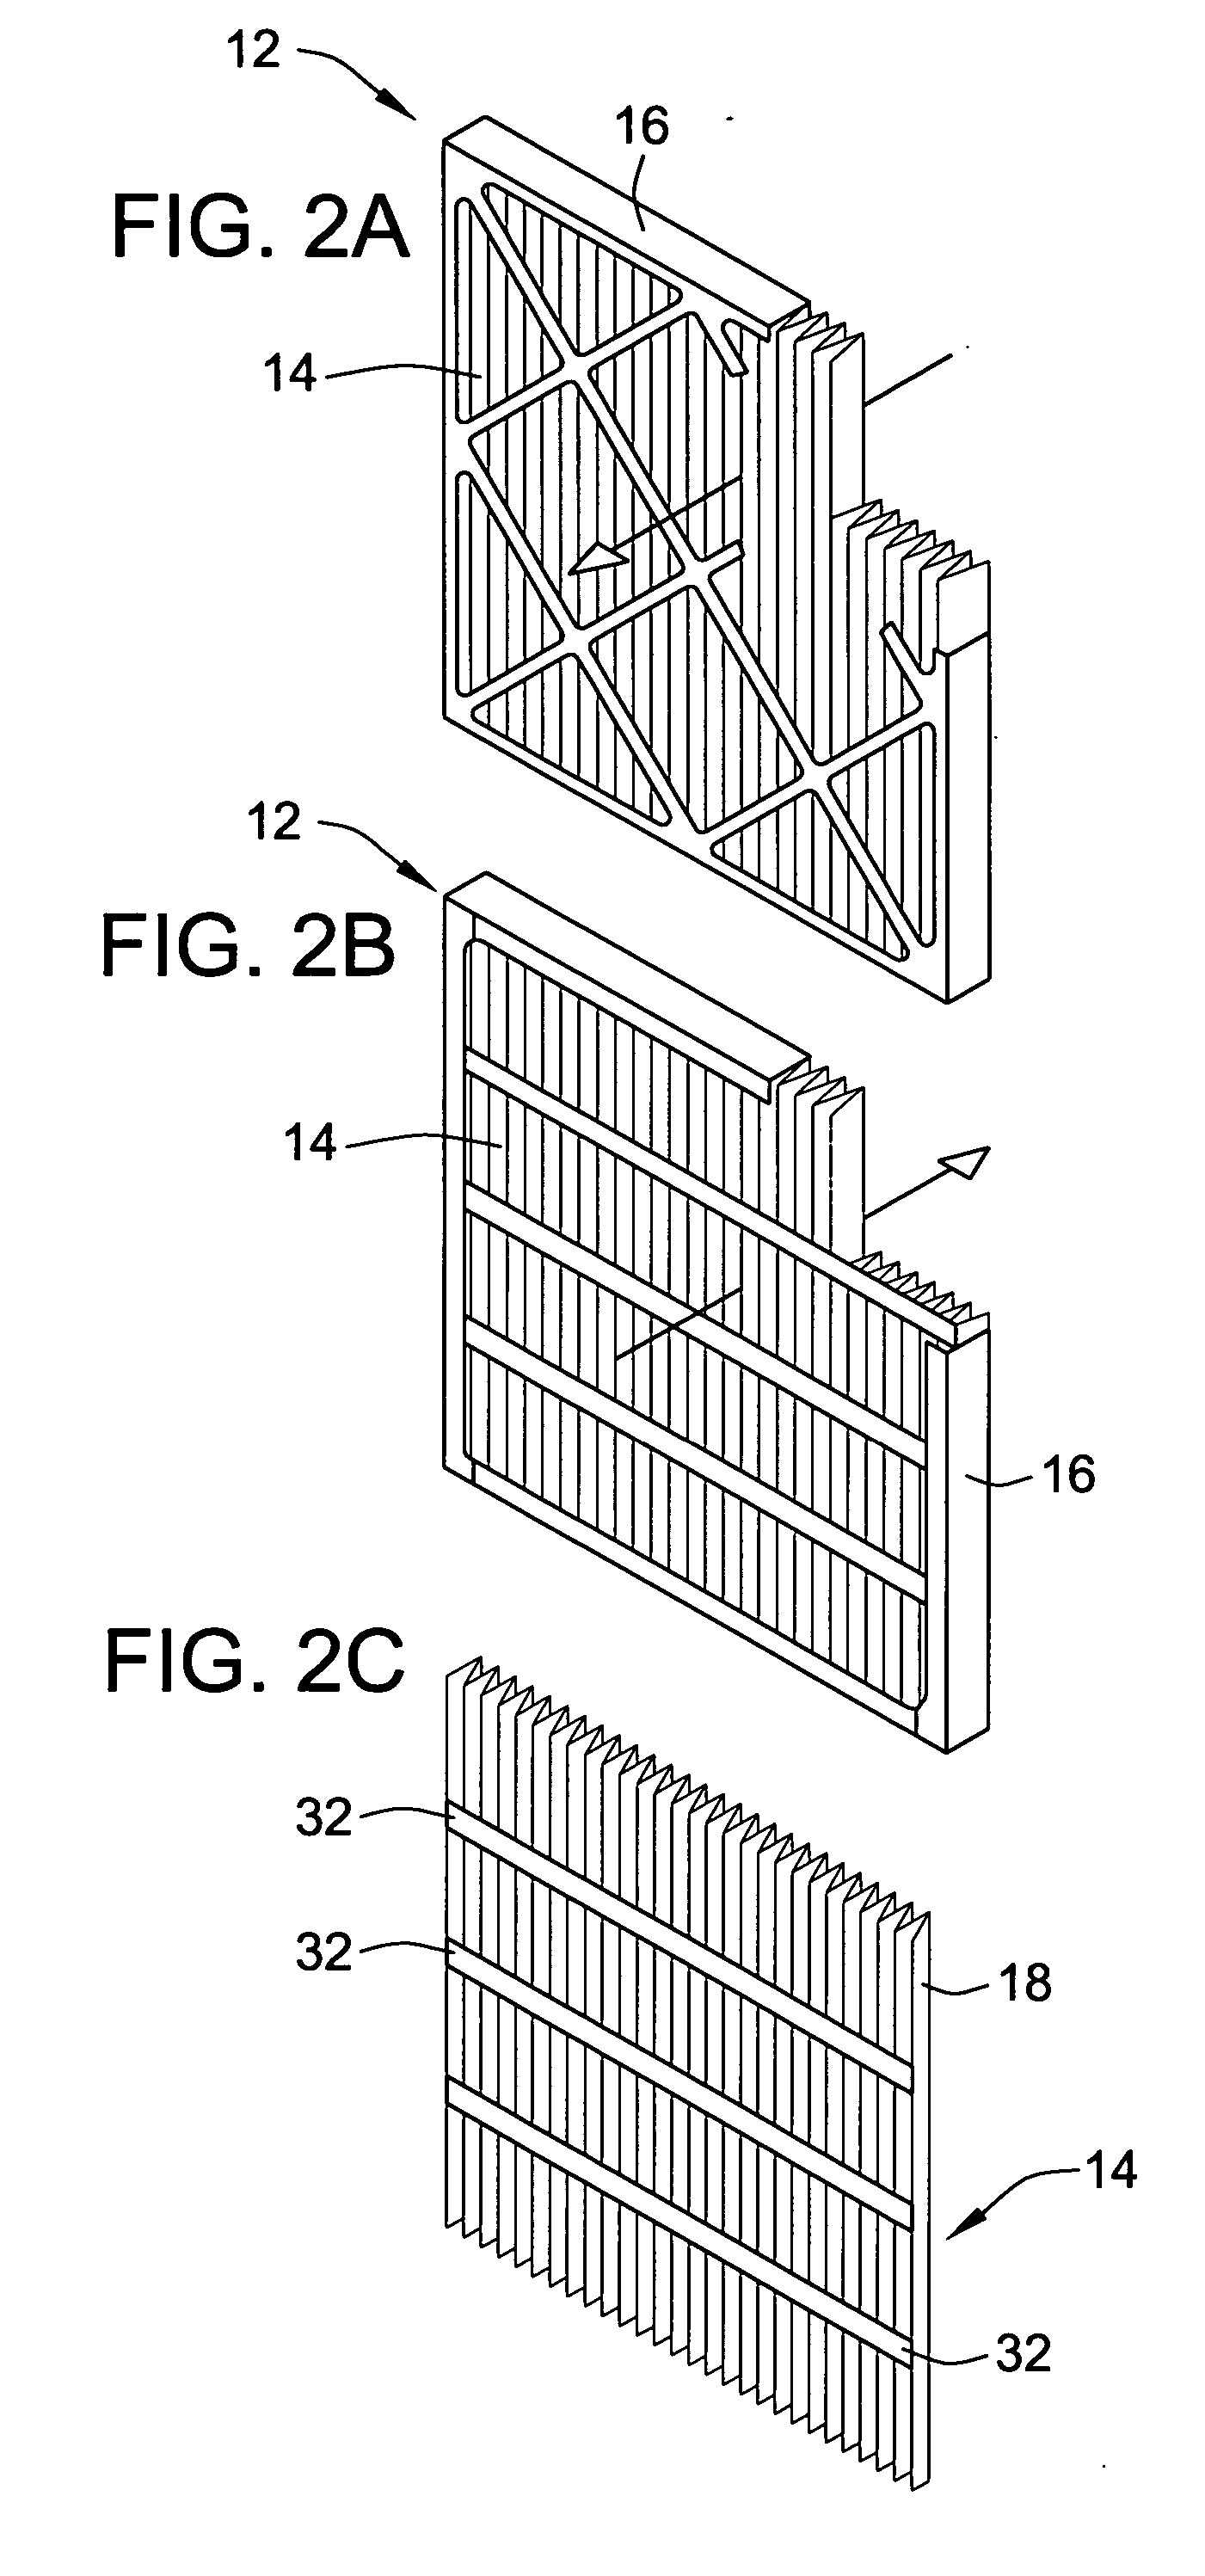 Fabricating a self-supporting filter element